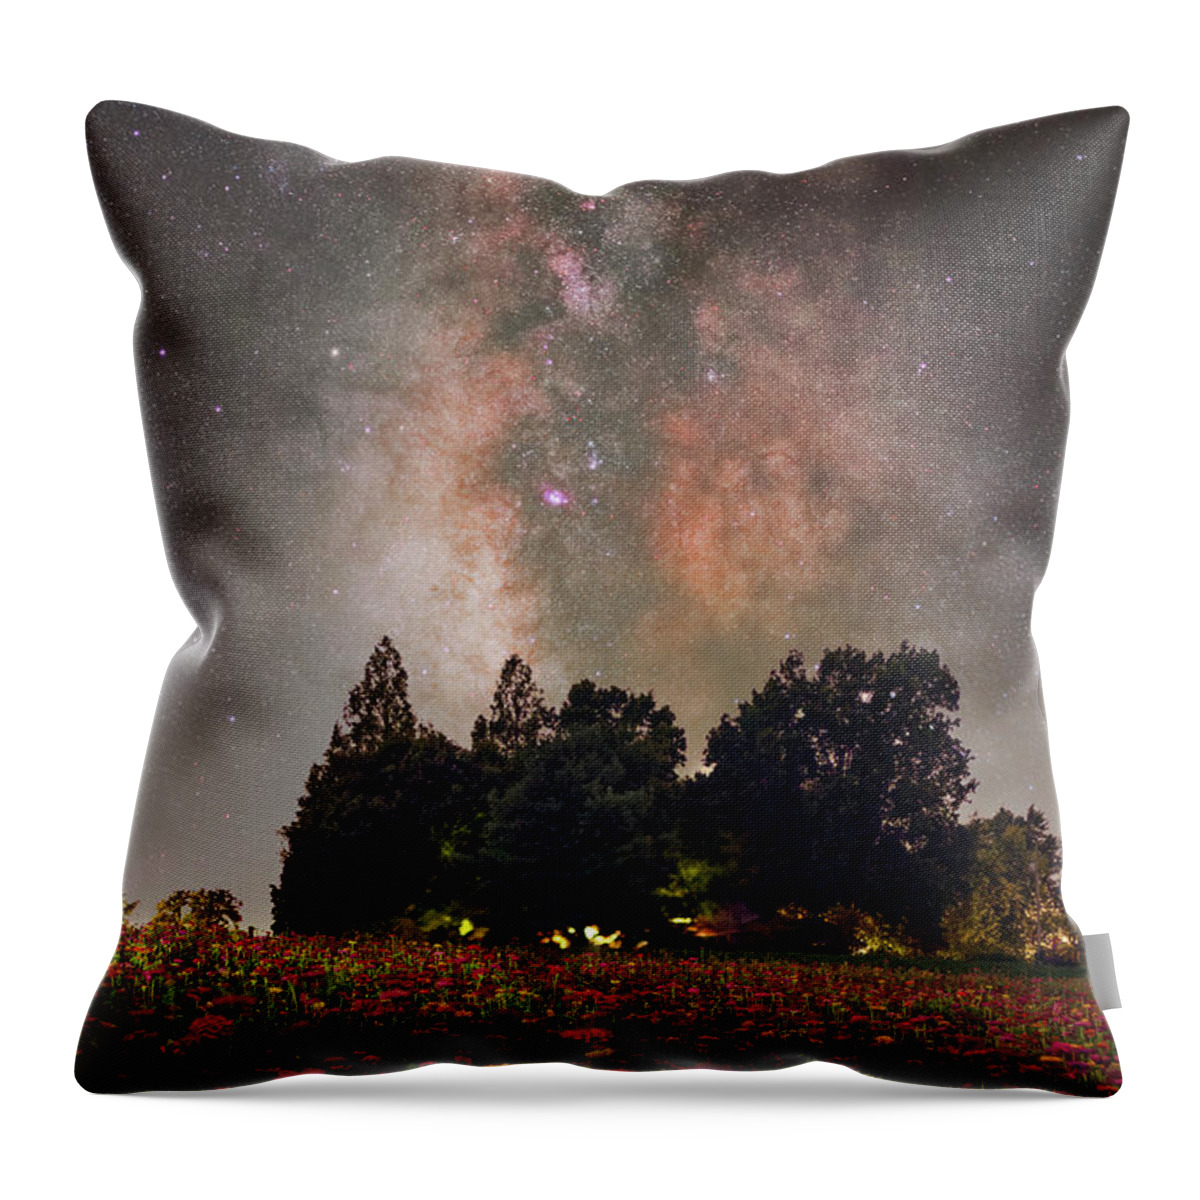 Nightscape Throw Pillow featuring the photograph Fire and Flowers by Grant Twiss